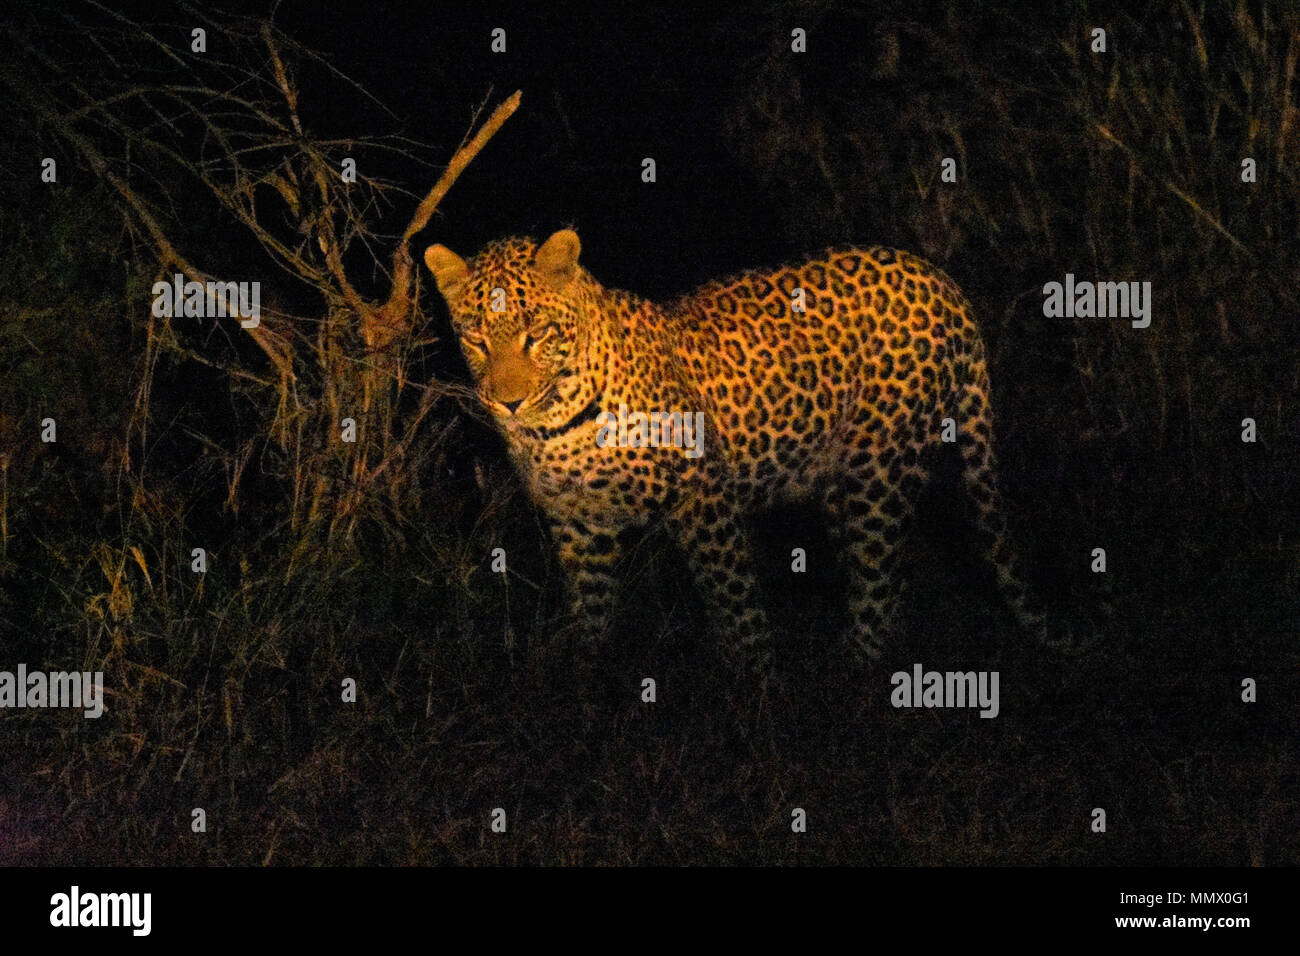 African Leopard, Panthera pardus, at night, Kruger national Park, South Africa Stock Photo